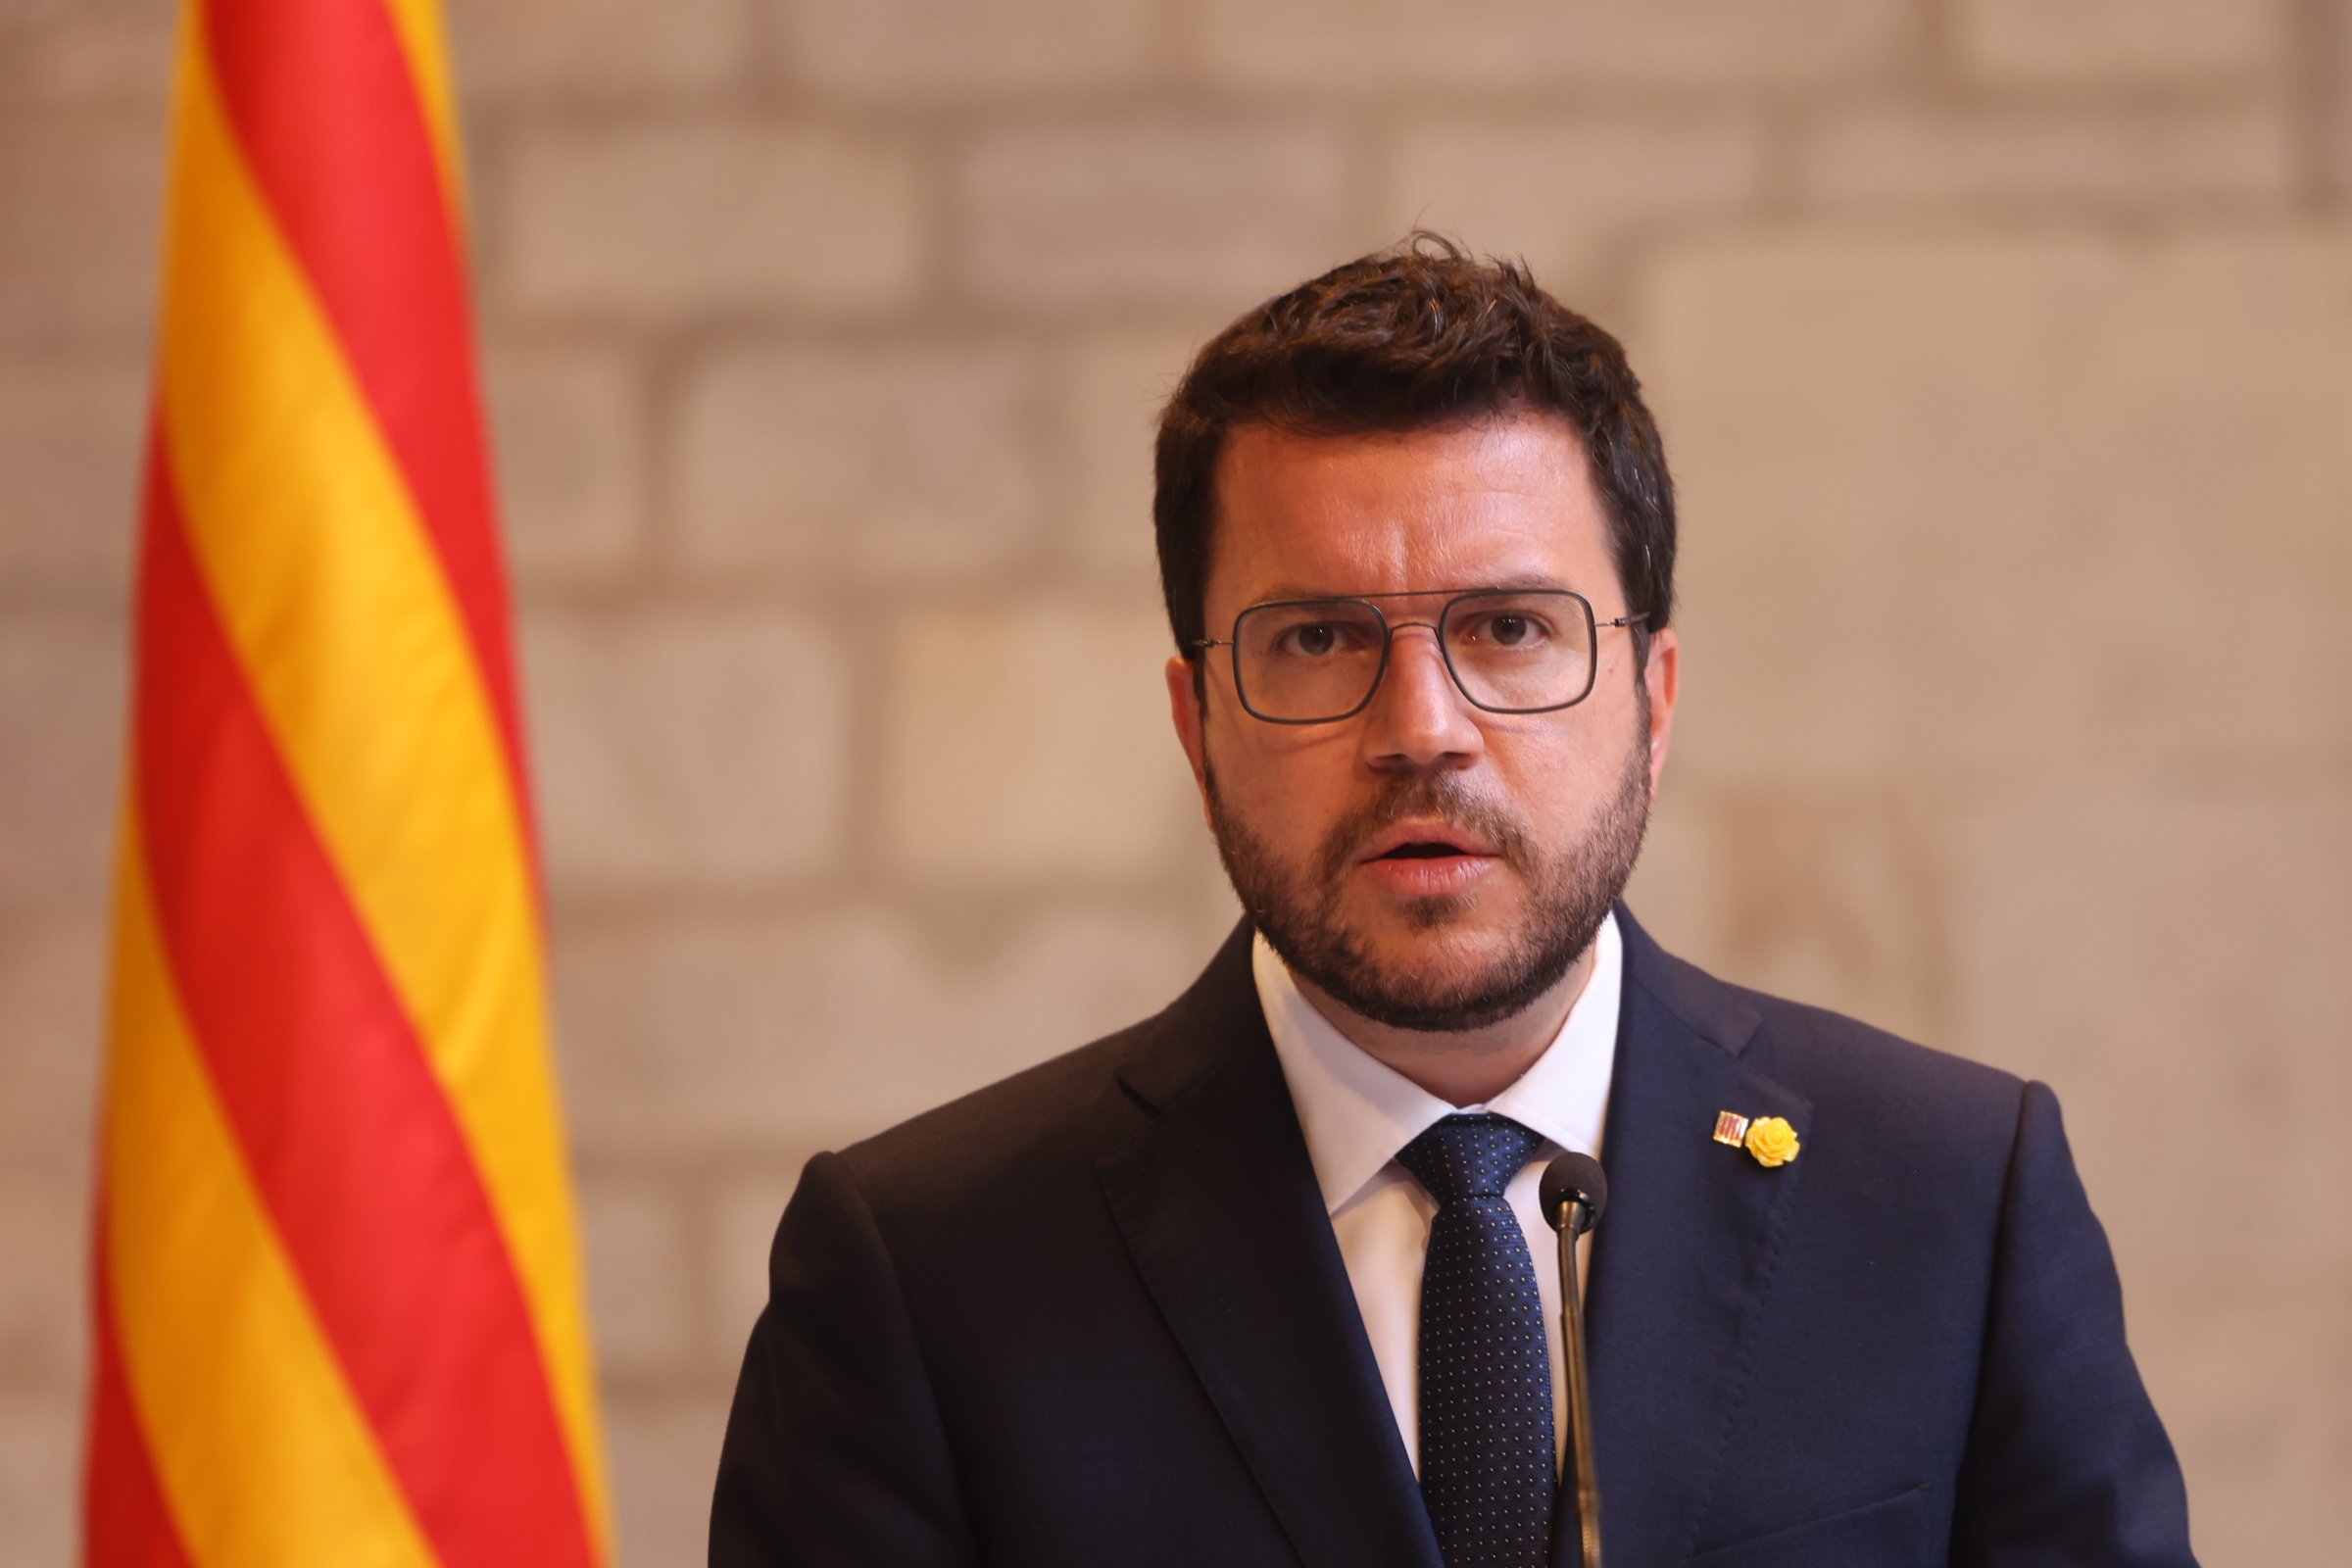 Aragonès: "The members proposed by Junts will take part in the dialogue process"